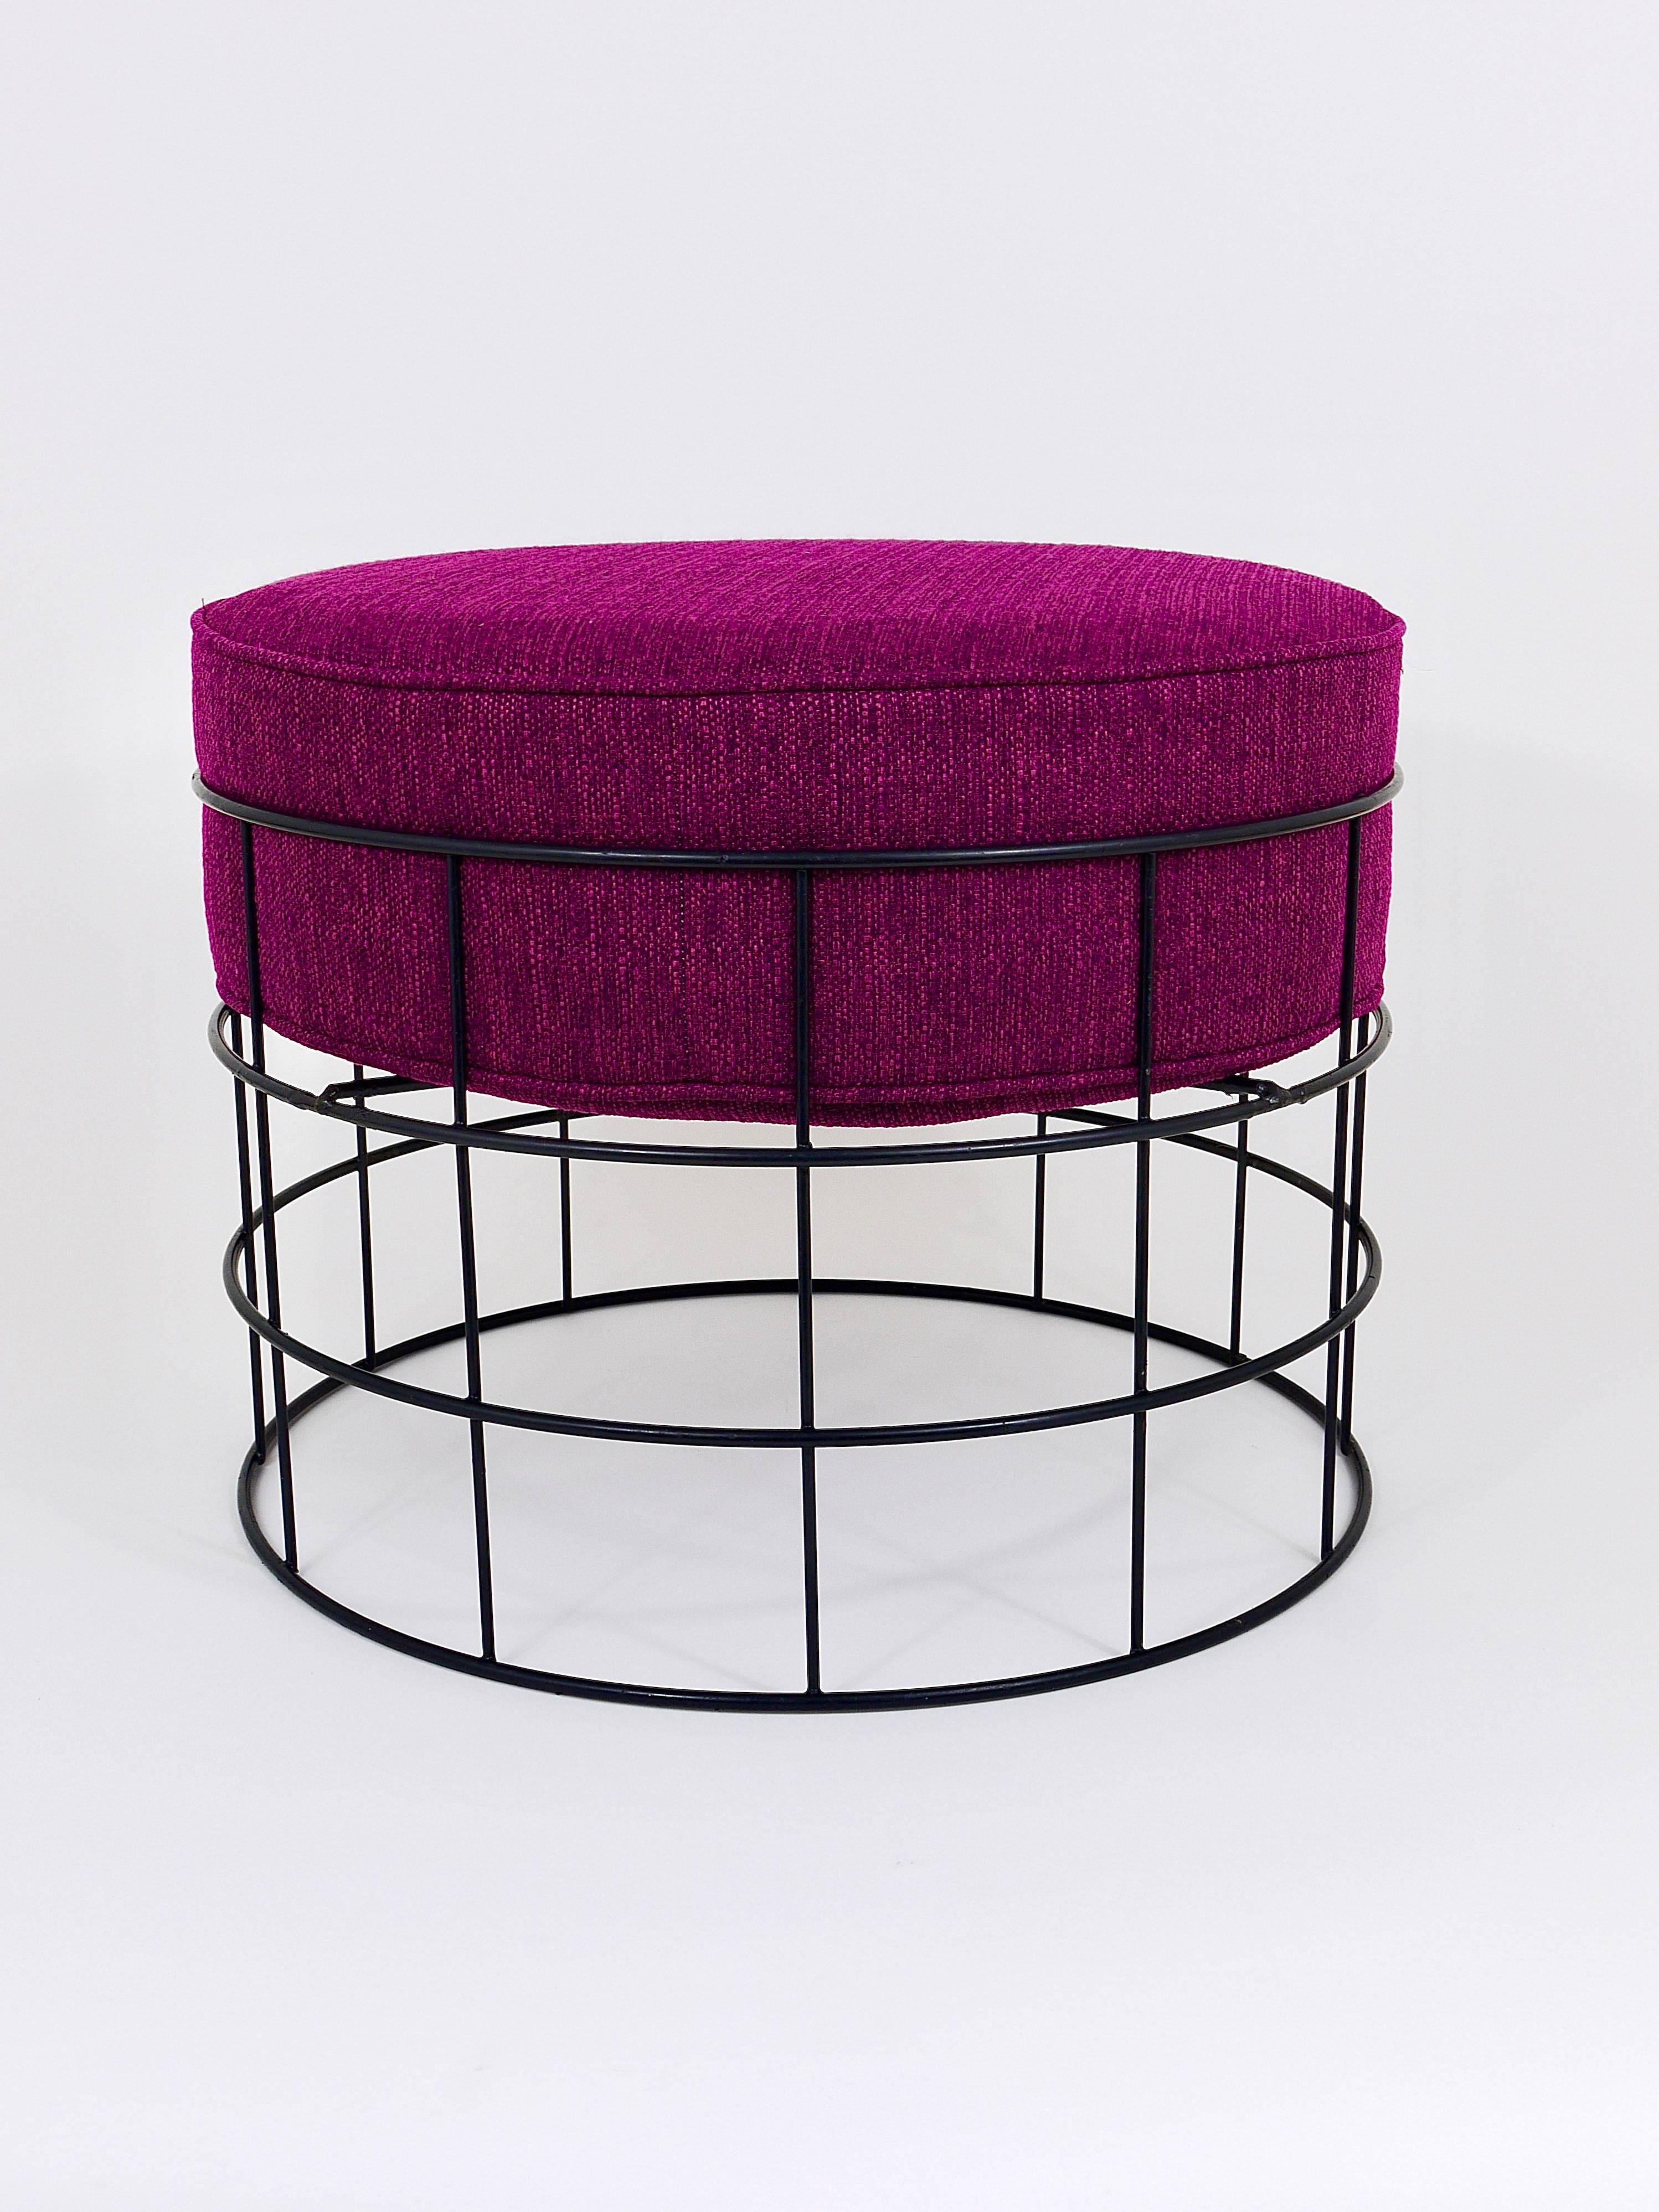 A beautiful round wire stool from the 1960s, designed by Verner Panton for Studio Linje, Denmark. It features a wire frame base made from black-coated metal as well as a newly upholstered seat pad in purple/pink/violett. The stool is in very good